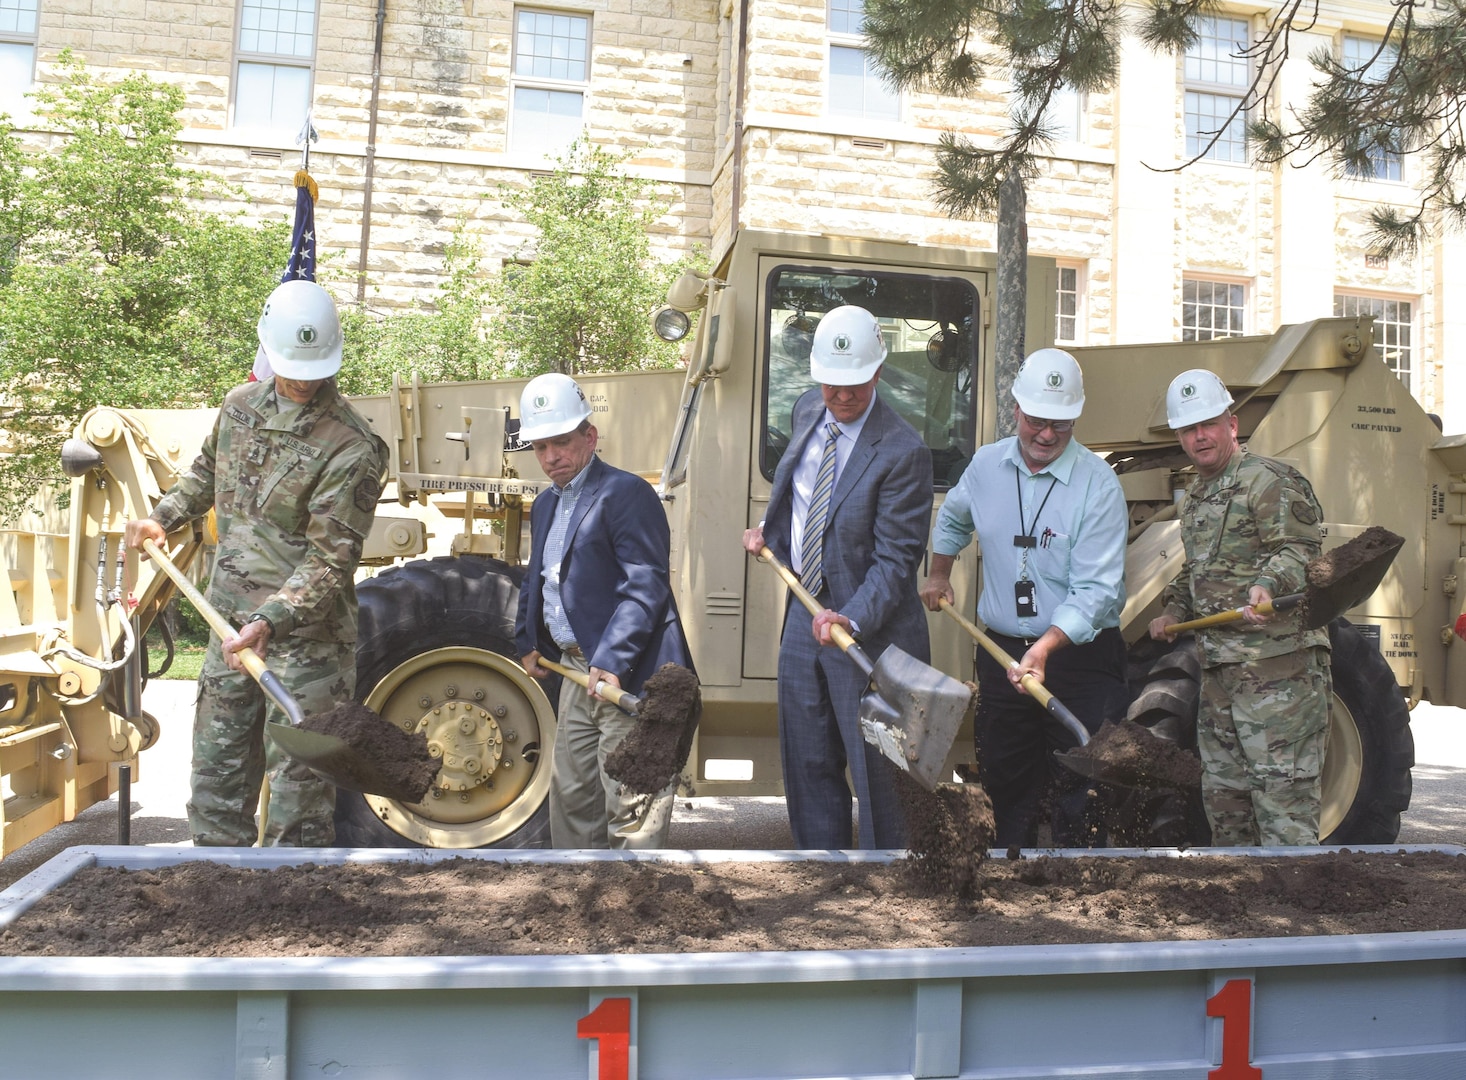 LEFT TO RIGHT: Command Sgt. Maj. James Collins, United States Army Garrison Fort Riley; Albert Marin, programs director for the Huntsville Engineering and Support Center; Joseph Cvetas, executive vice president for Southland Industries; Sandy Walker, Fort Riley Public Works; Col. John D. Lawrence, Fort Riley garrison commander, turn ceremonial dirt during a groundbreaking ceremony June 13 at Fort Riley. The ceremony highlighted the award of an energy savings performance contract to Southland Energy and commemorated the start of the construction phase.
